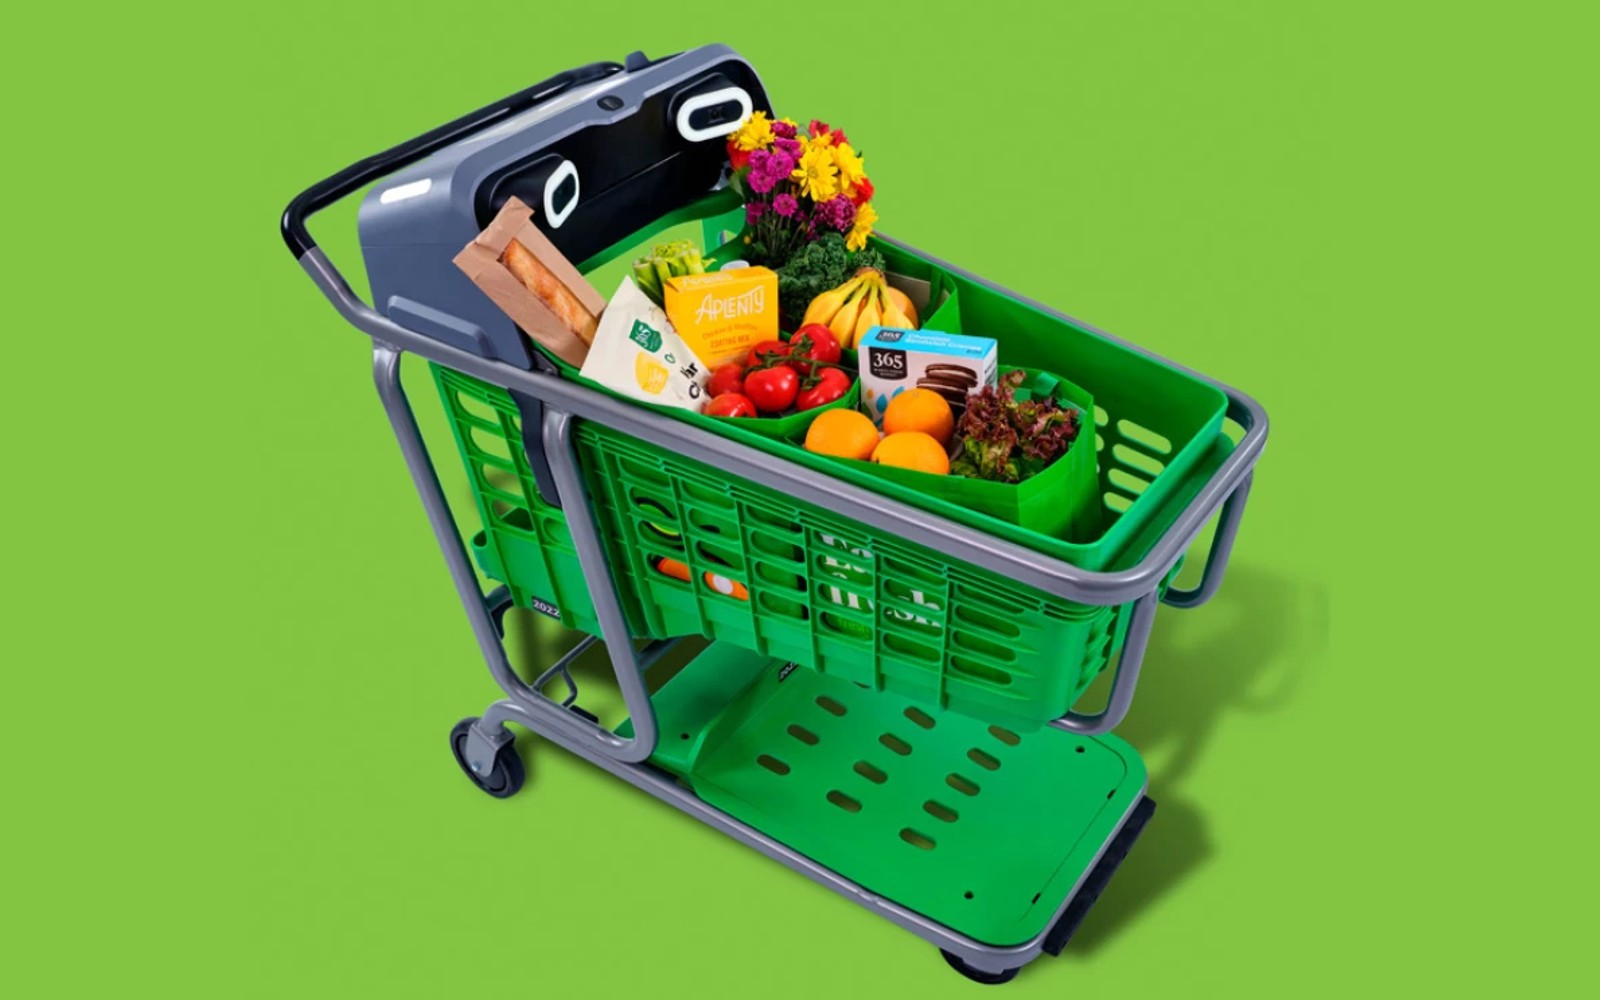 Amazon is finally bringing its smart shopping cart to Whole Foods